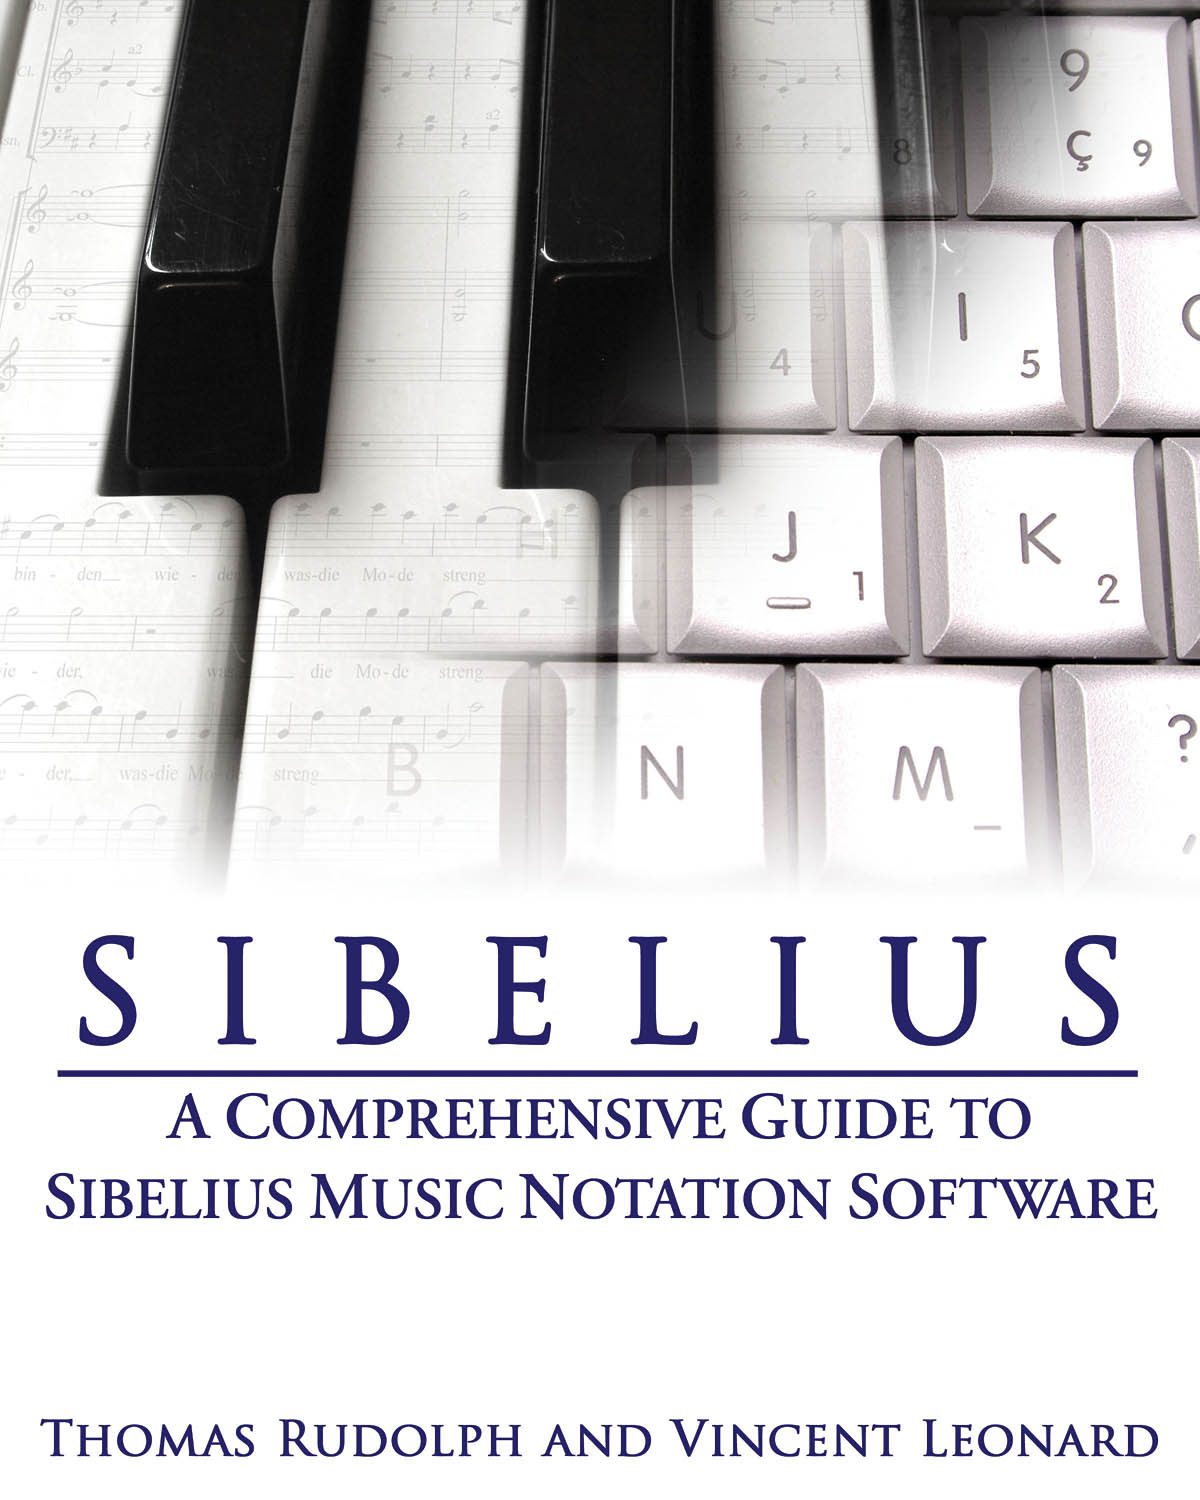 Sibelius: A Comprehensive Guide to Sibelius Notation Software: A Comprehensive Guide to Sibelius Music Notation Software